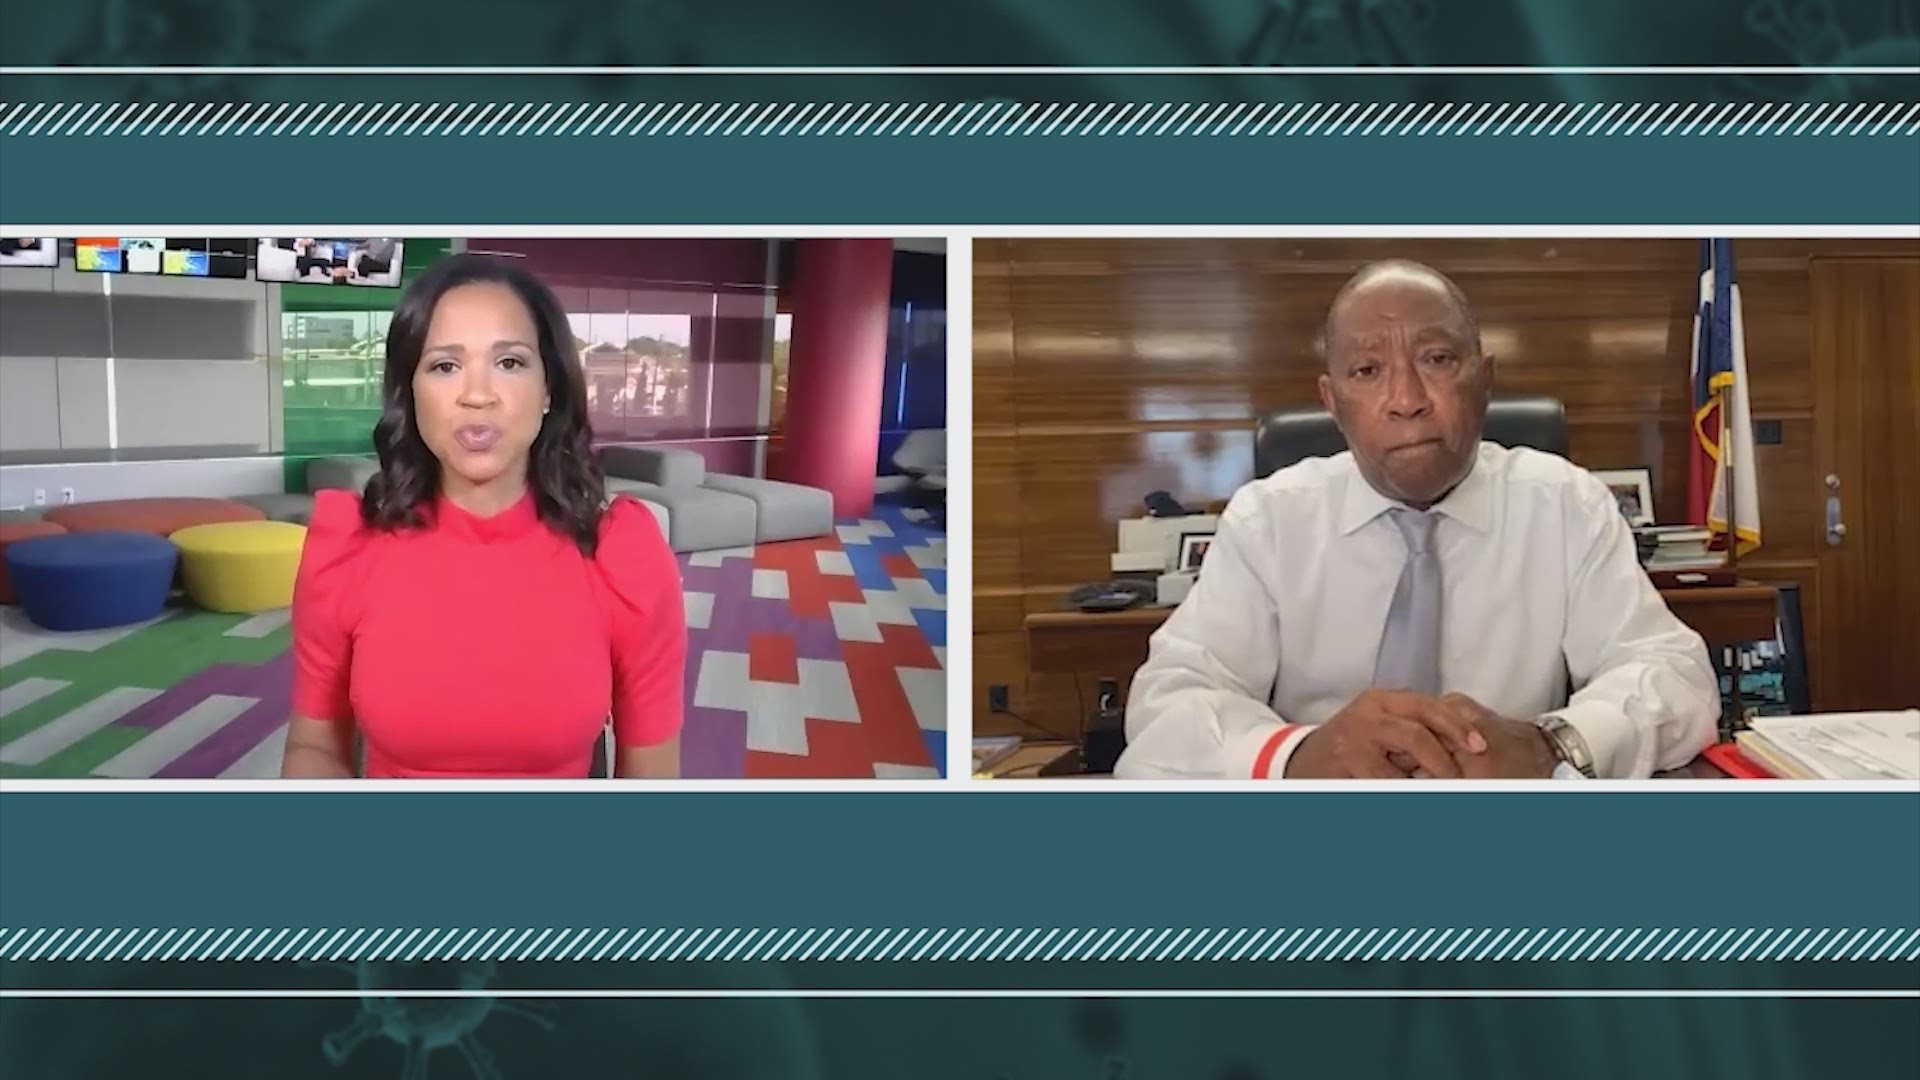 Houston Mayor Sylvester Turner opened up to KHOU 11's Mia Gradney about the state of the city during the coronavirus pandemic.